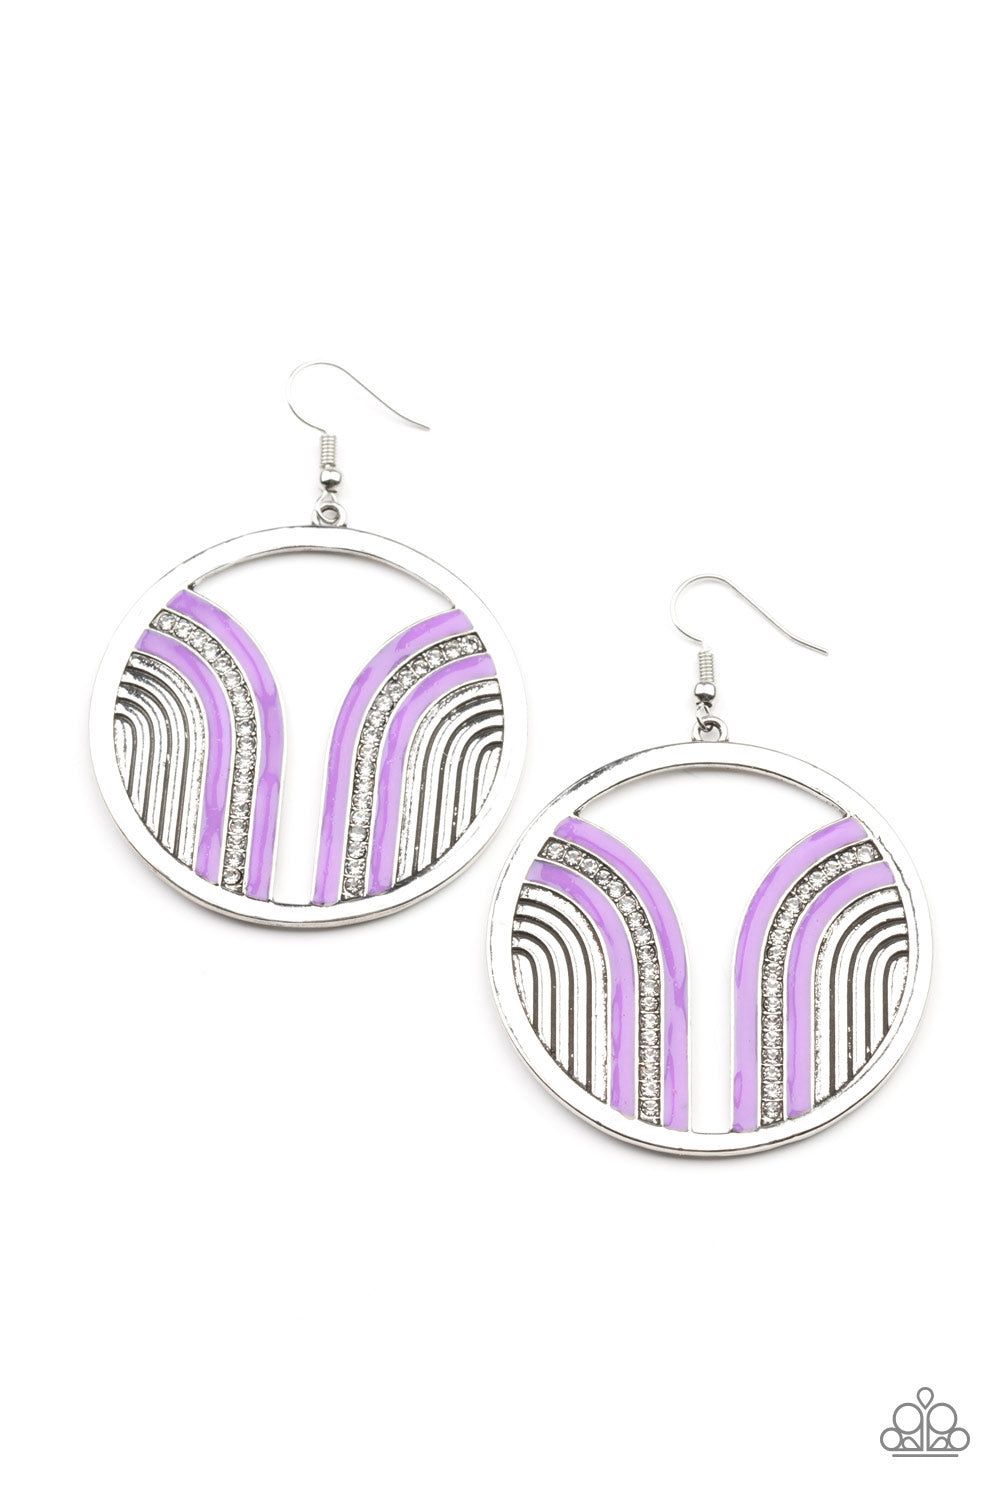 D214 - Delightfully Deco, Paparazzi Purple Earring by Paparazzi Accessories on Fancy5Fashion.com